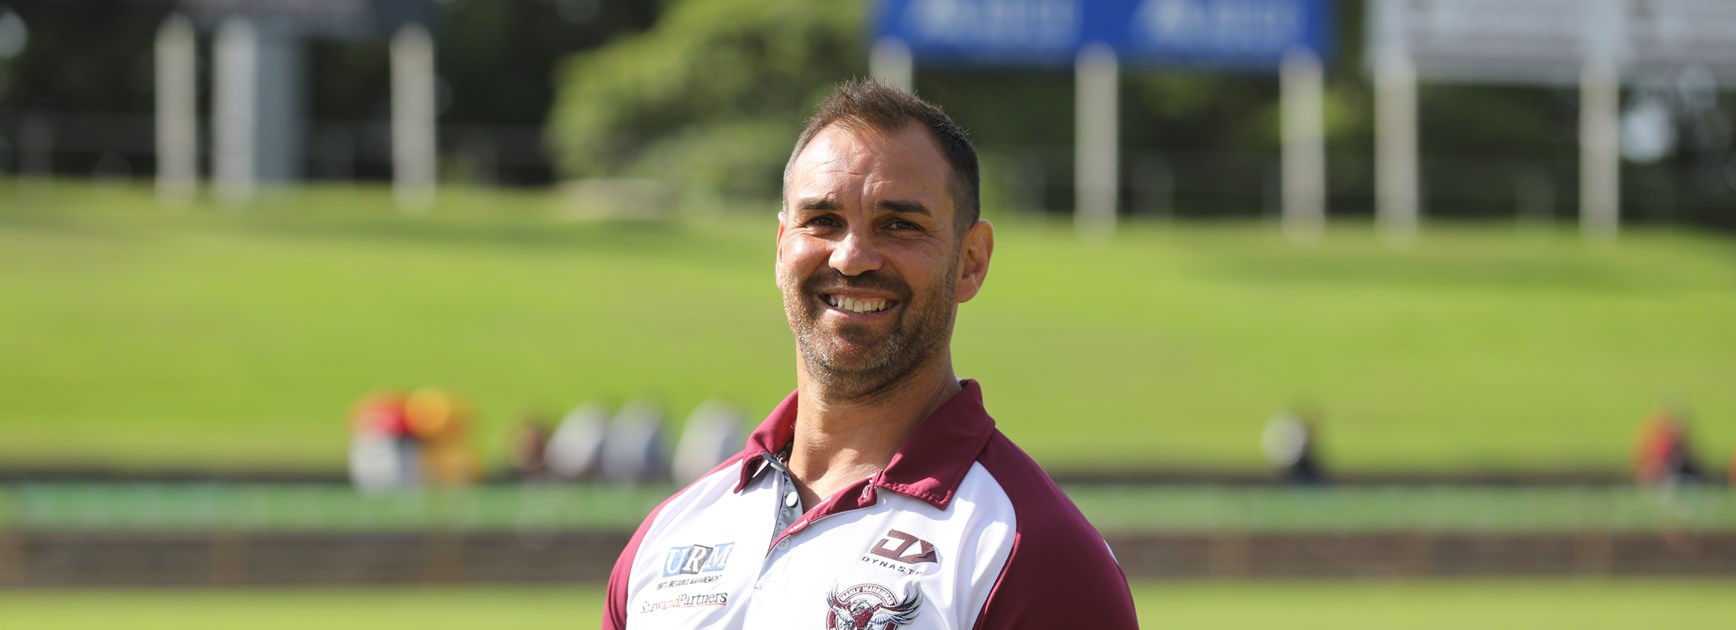 Adam McEwan has made an impressive start to his coaching career at Manly